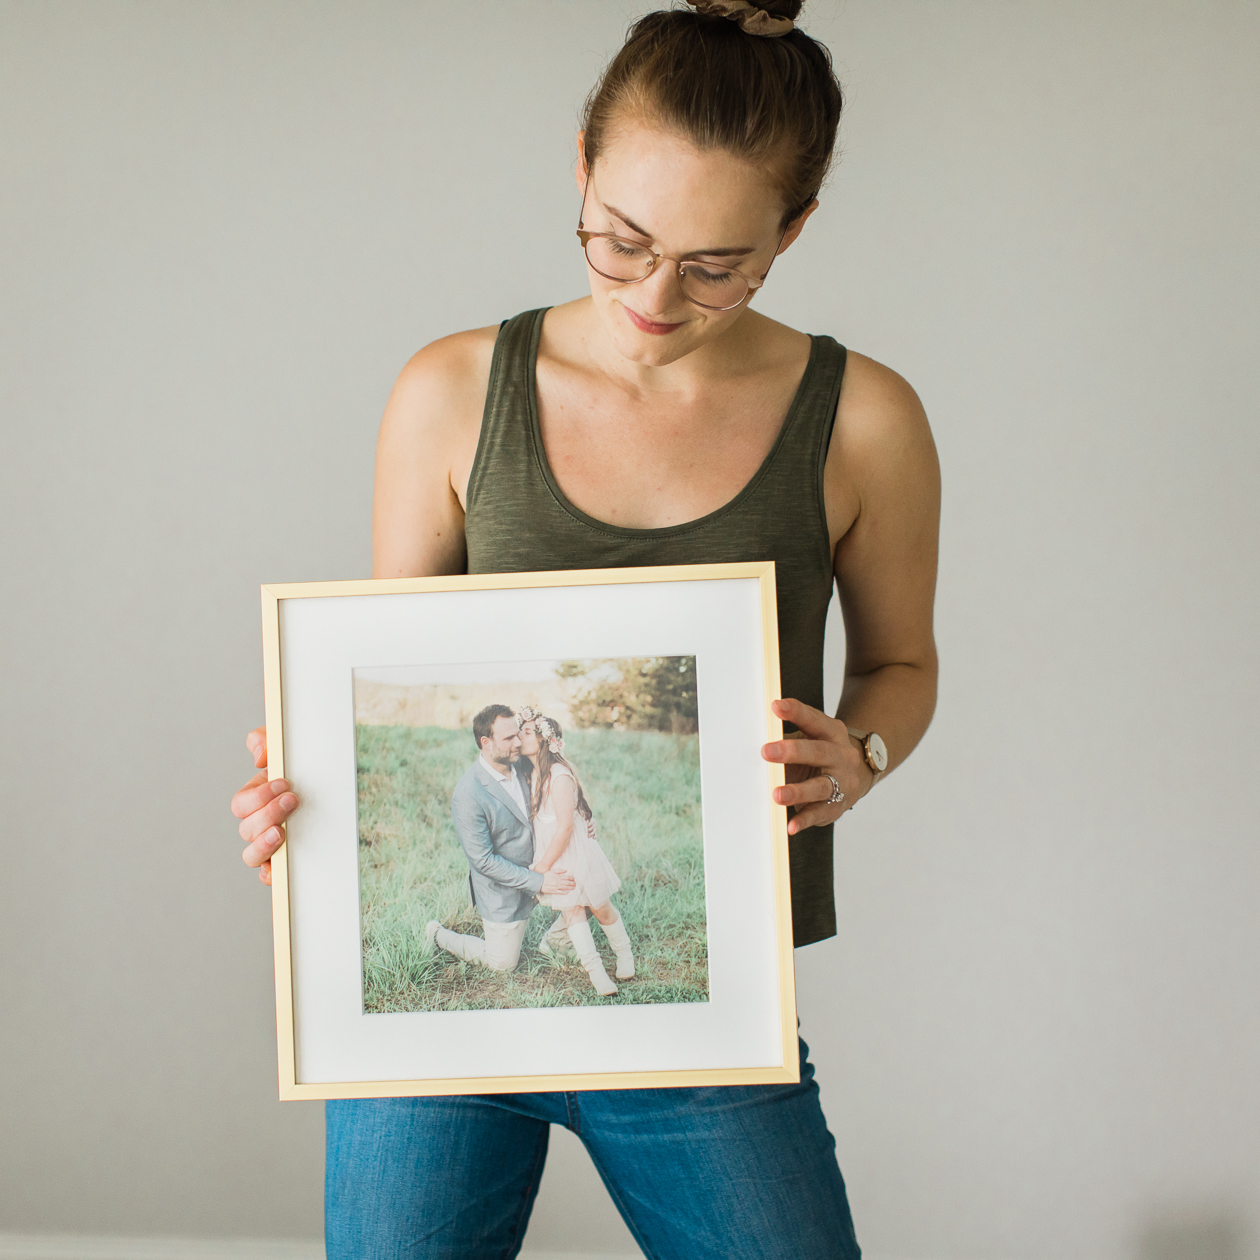 Photo gallery wall | Sarah Sidwell Photography